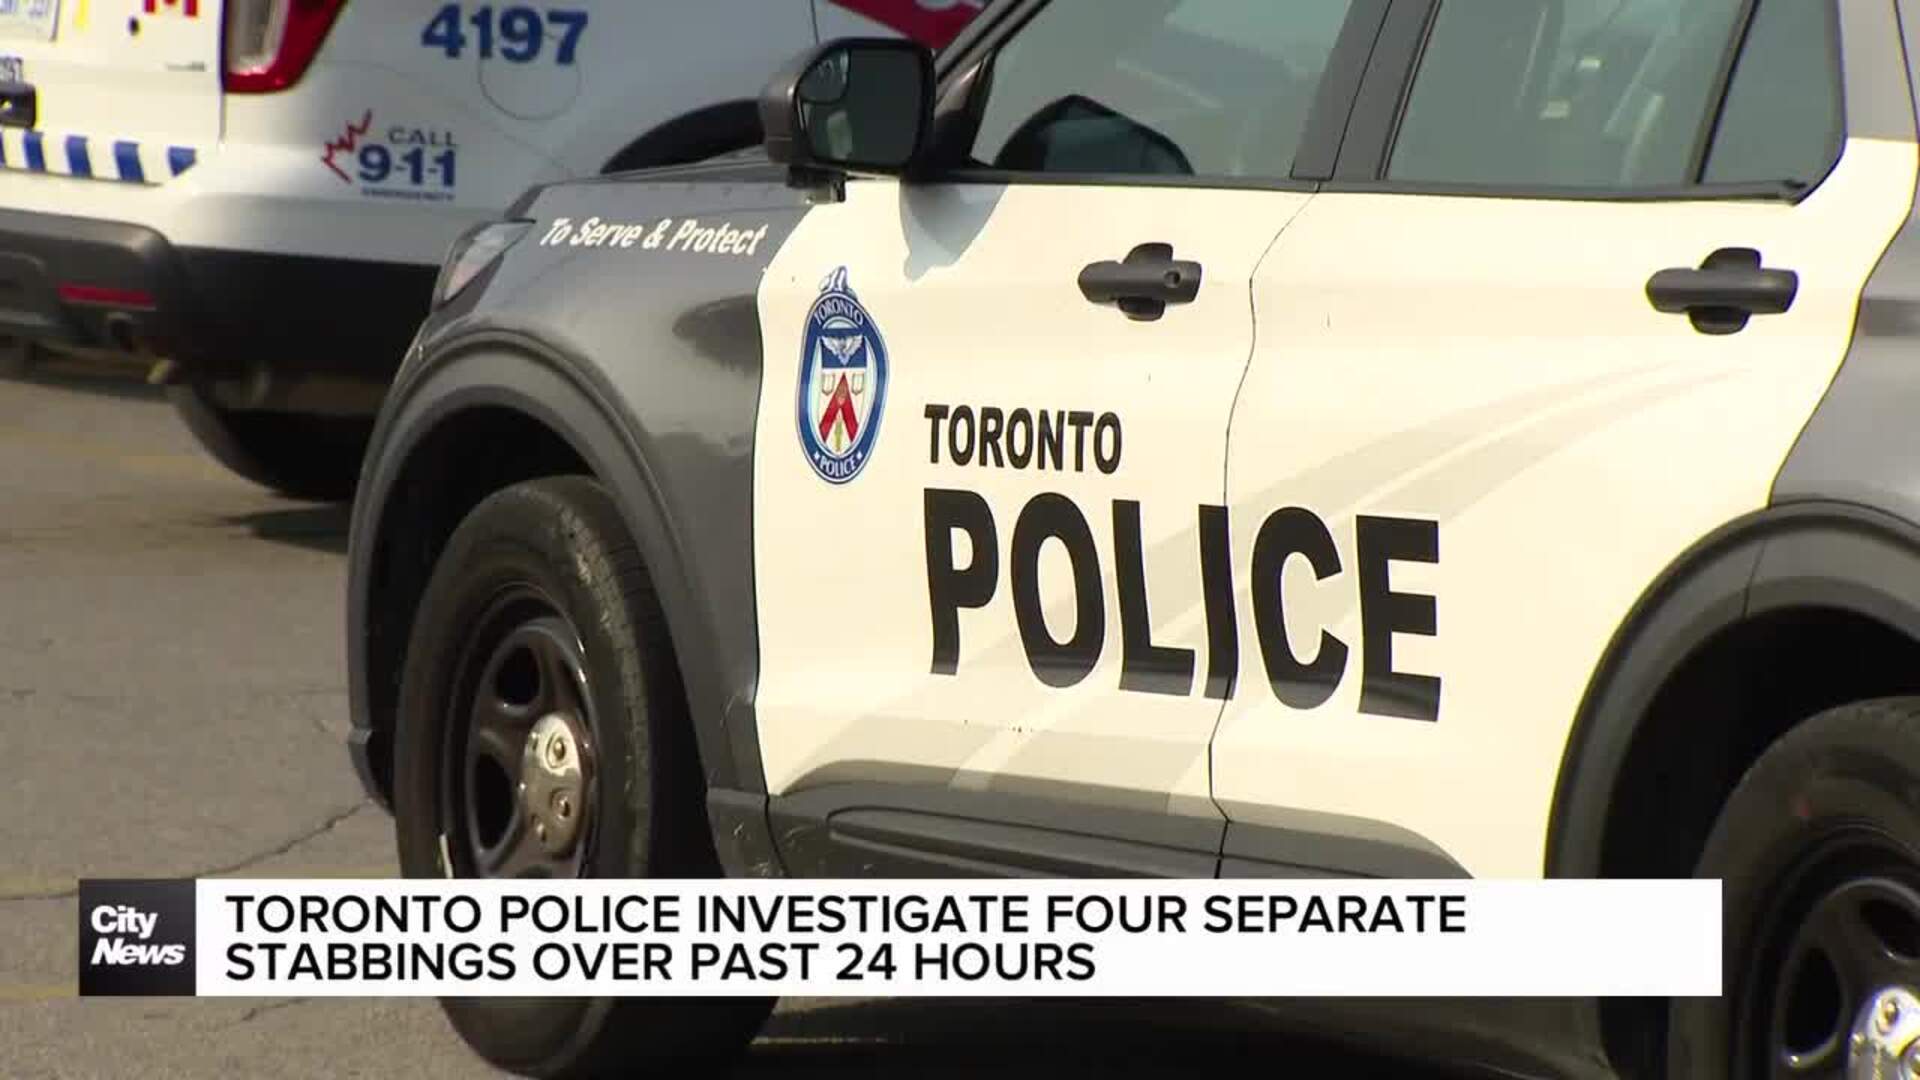 Toronto Police investigate four separate stabbings over past 24 hours